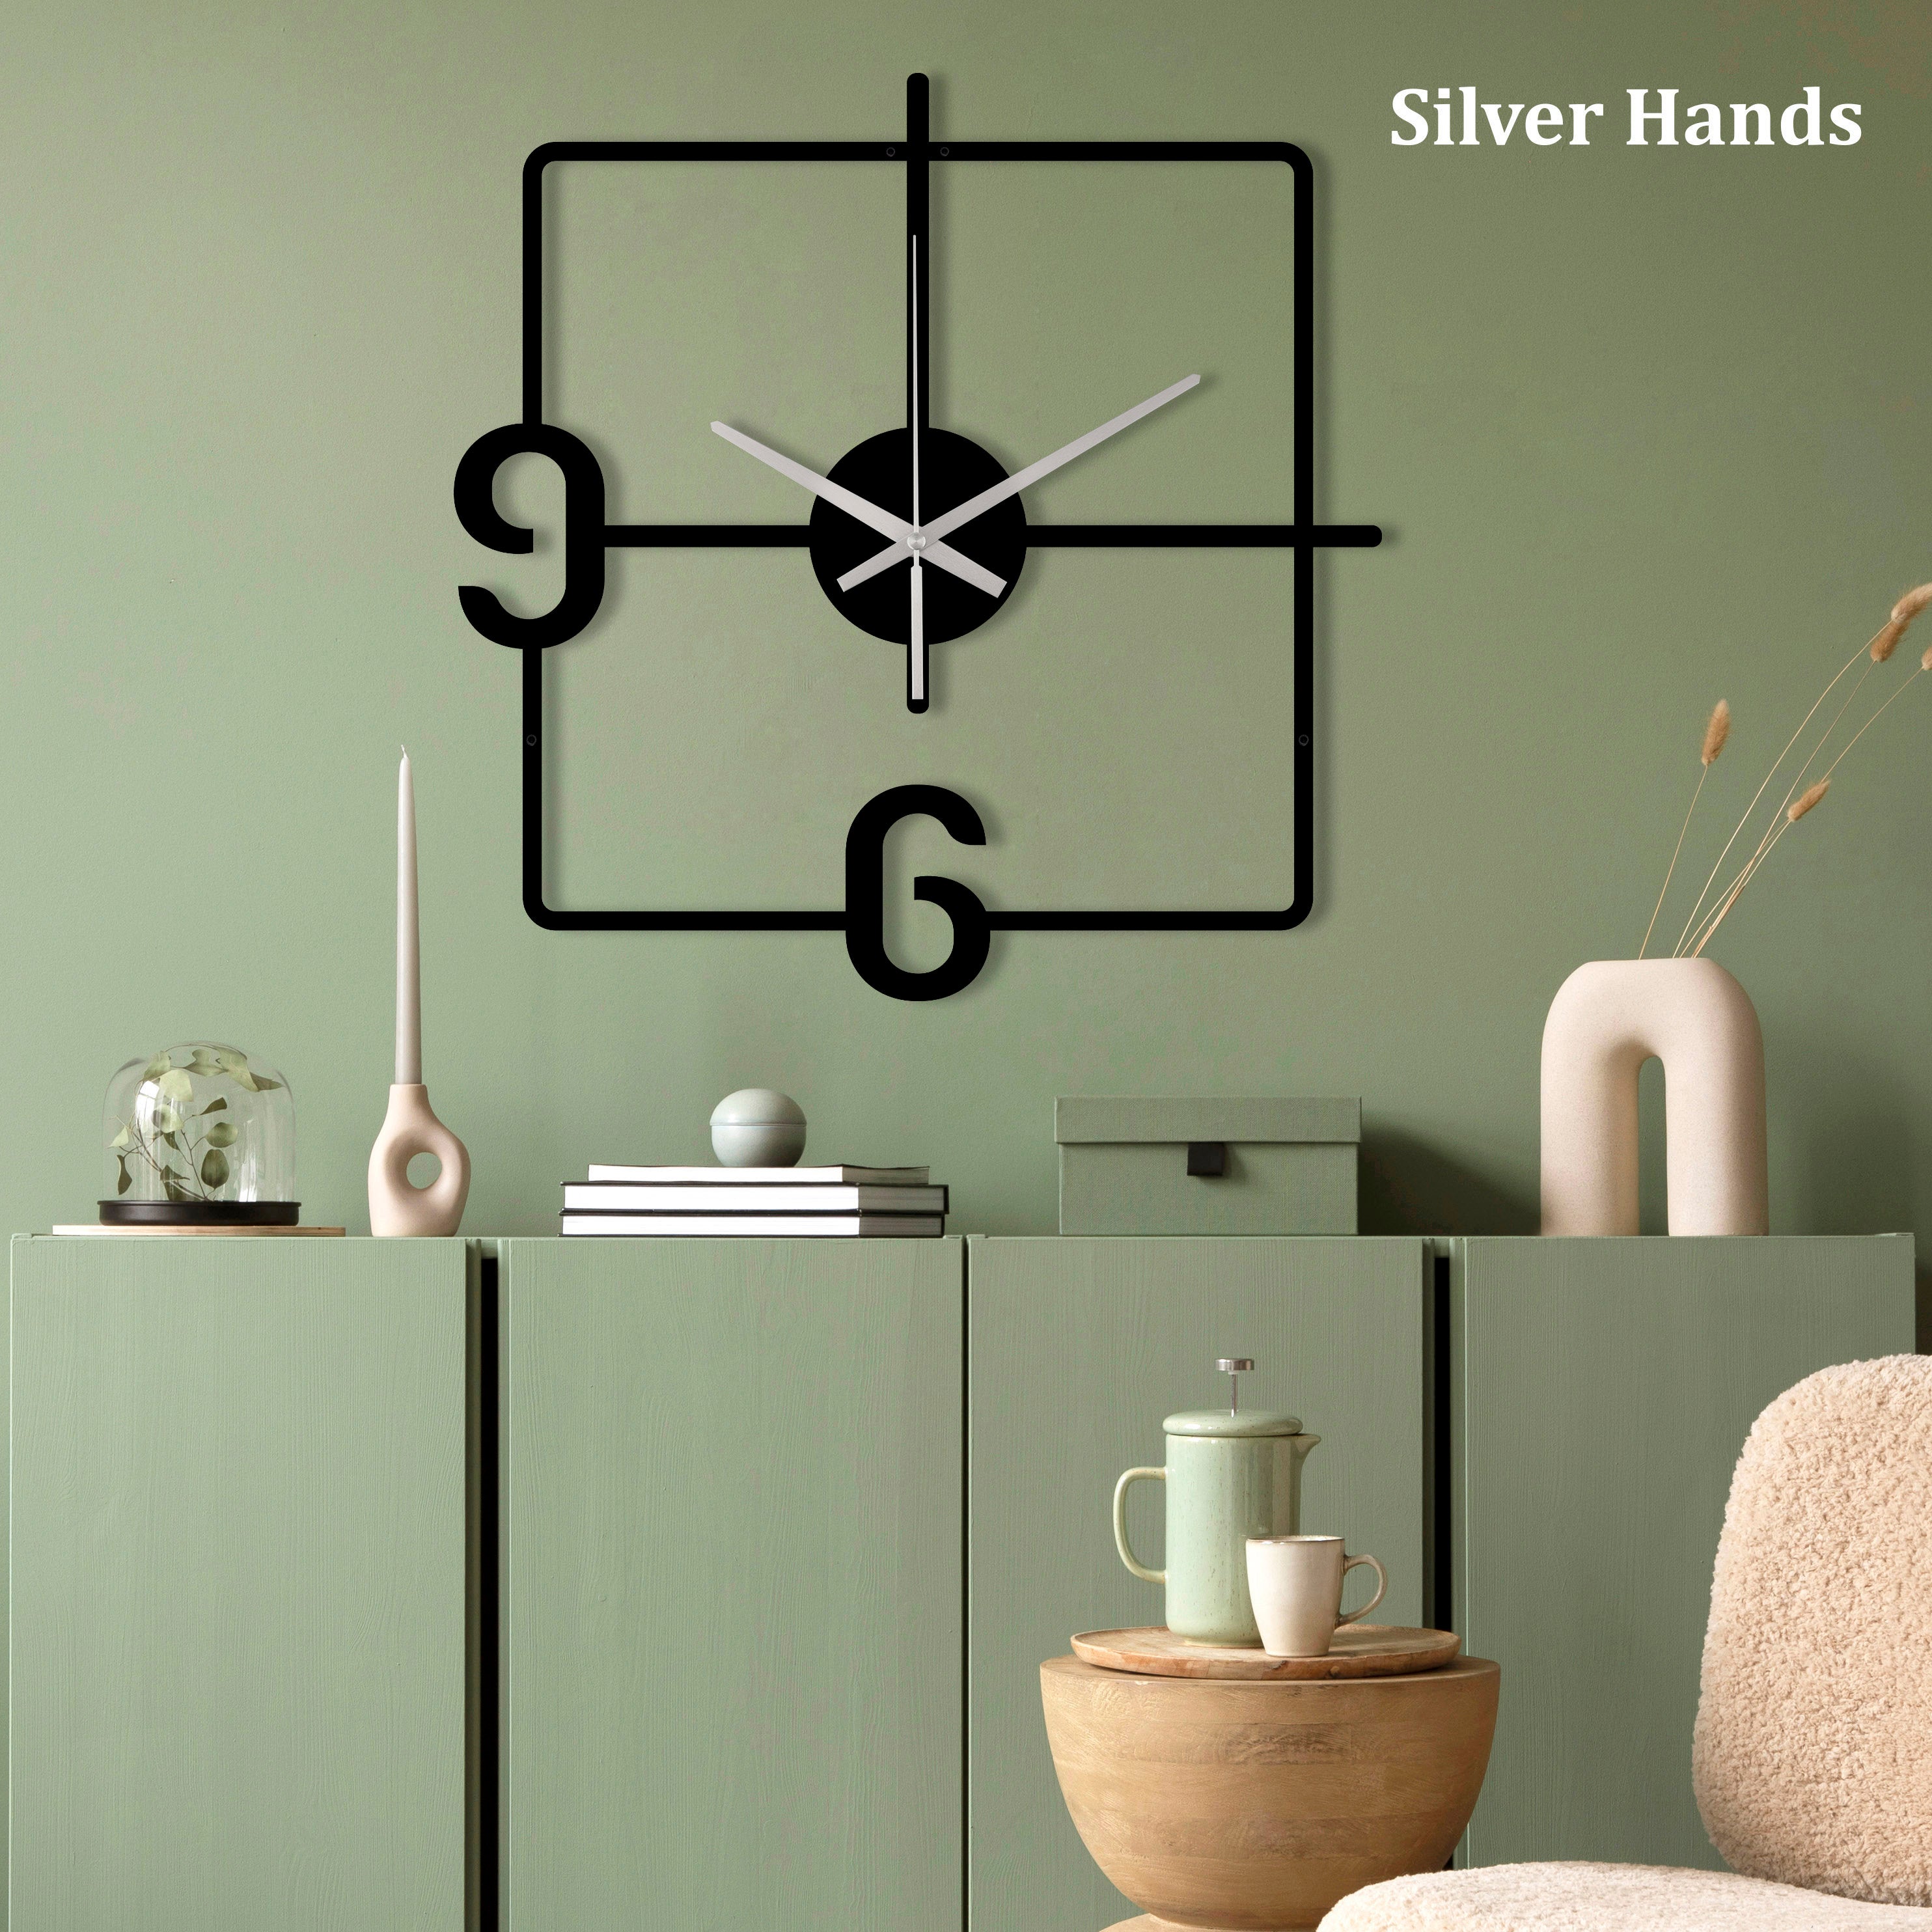 Minimalist Clock, Square Wall Clock, Unique Wall Clock, Black Metal Wall Clock, Silent Wall Clock, Home Decor And Gifts, Clocks For Wall